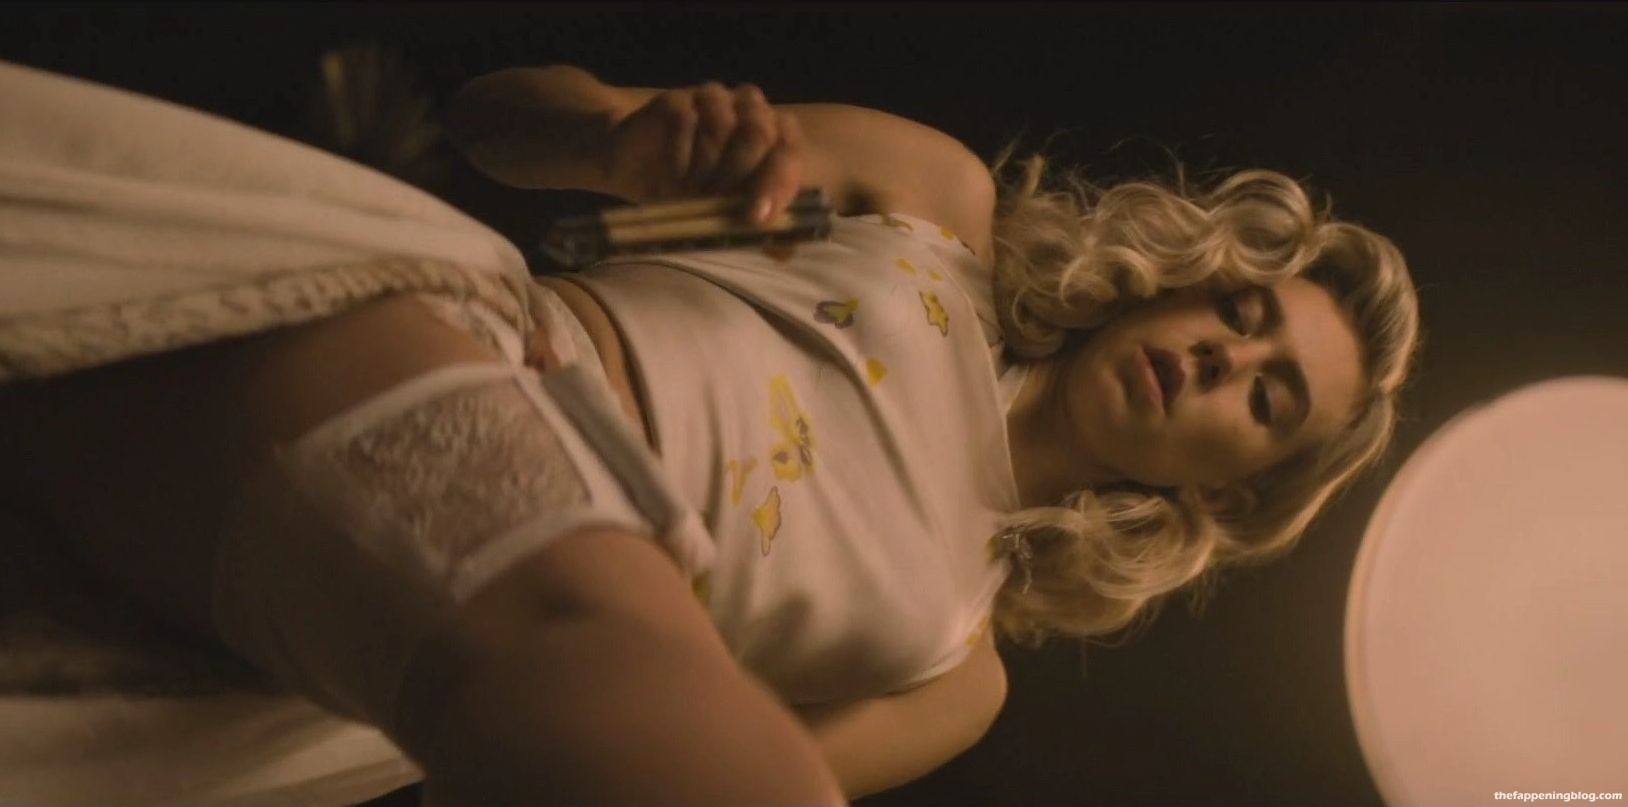 Vanessa Kirby Nude & Sexy Collection (126 Photos + Videos Scenes) [Updated]